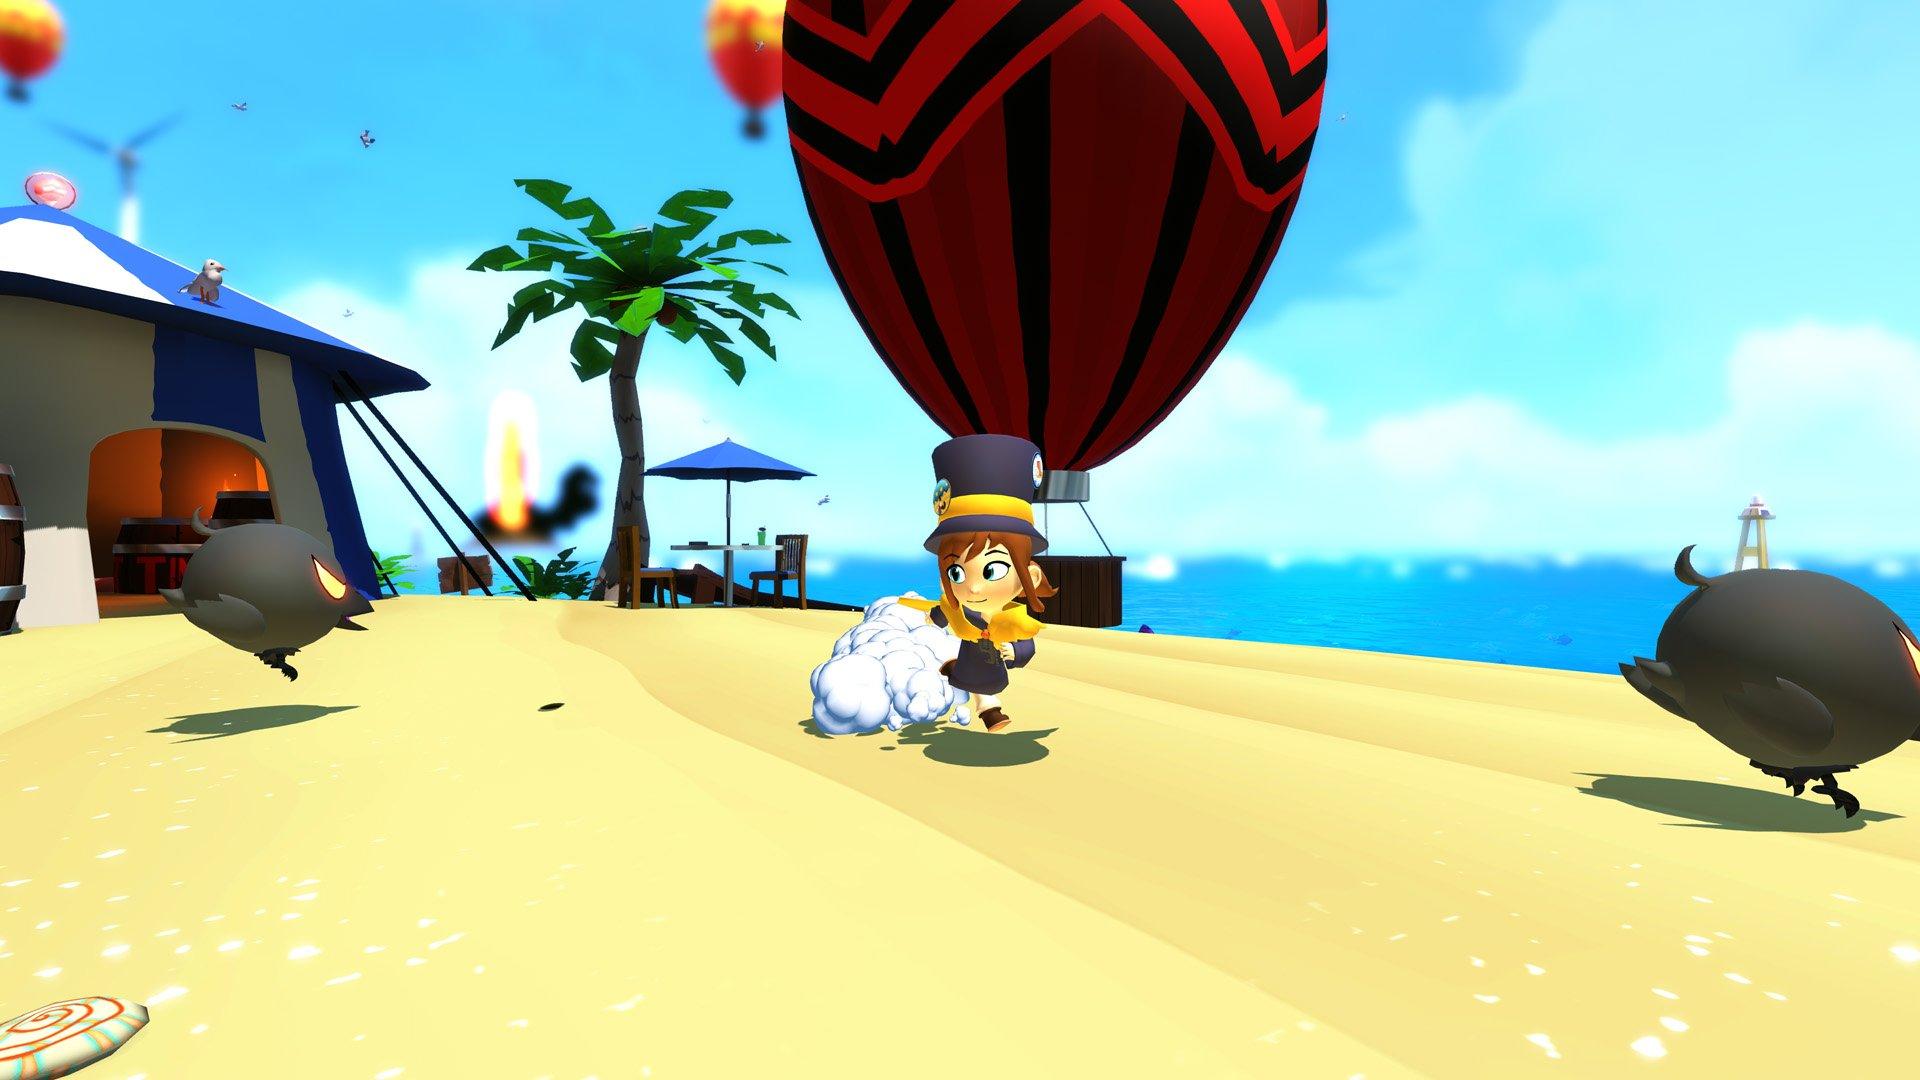 A Hat In Time [Sony PlayStation 4]